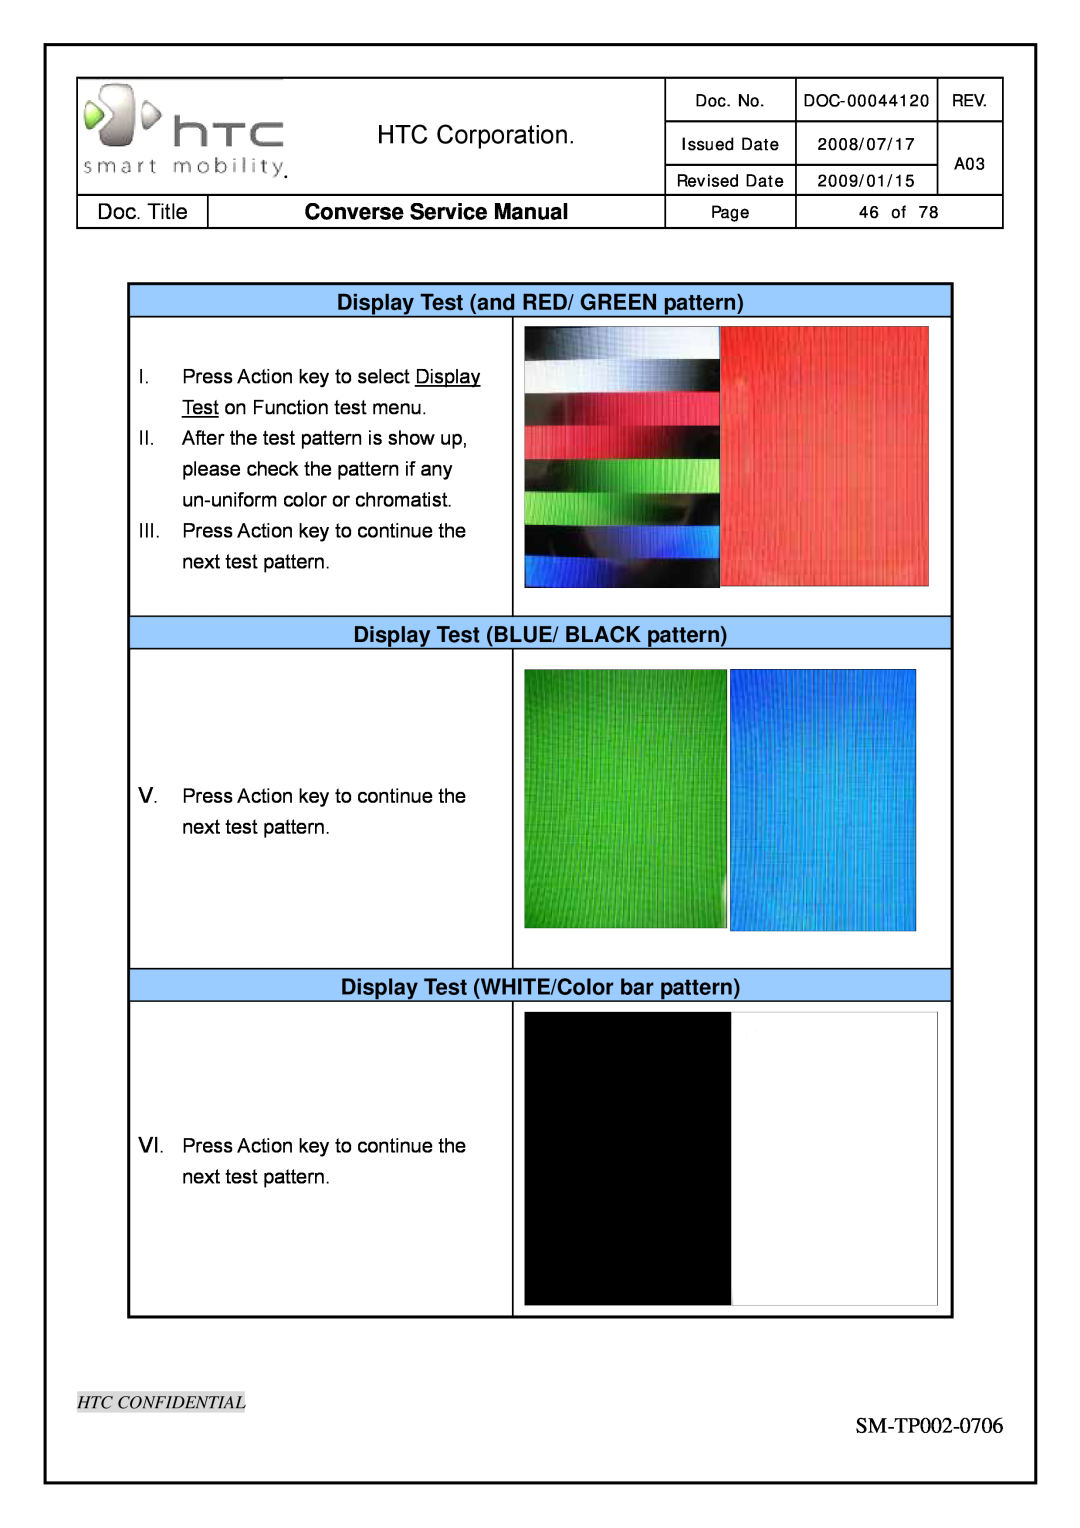 HTC SM-TP002-0706 service manual Display Test and RED/ GREEN pattern, Display Test BLUE/ BLACK pattern, HTC Corporation 